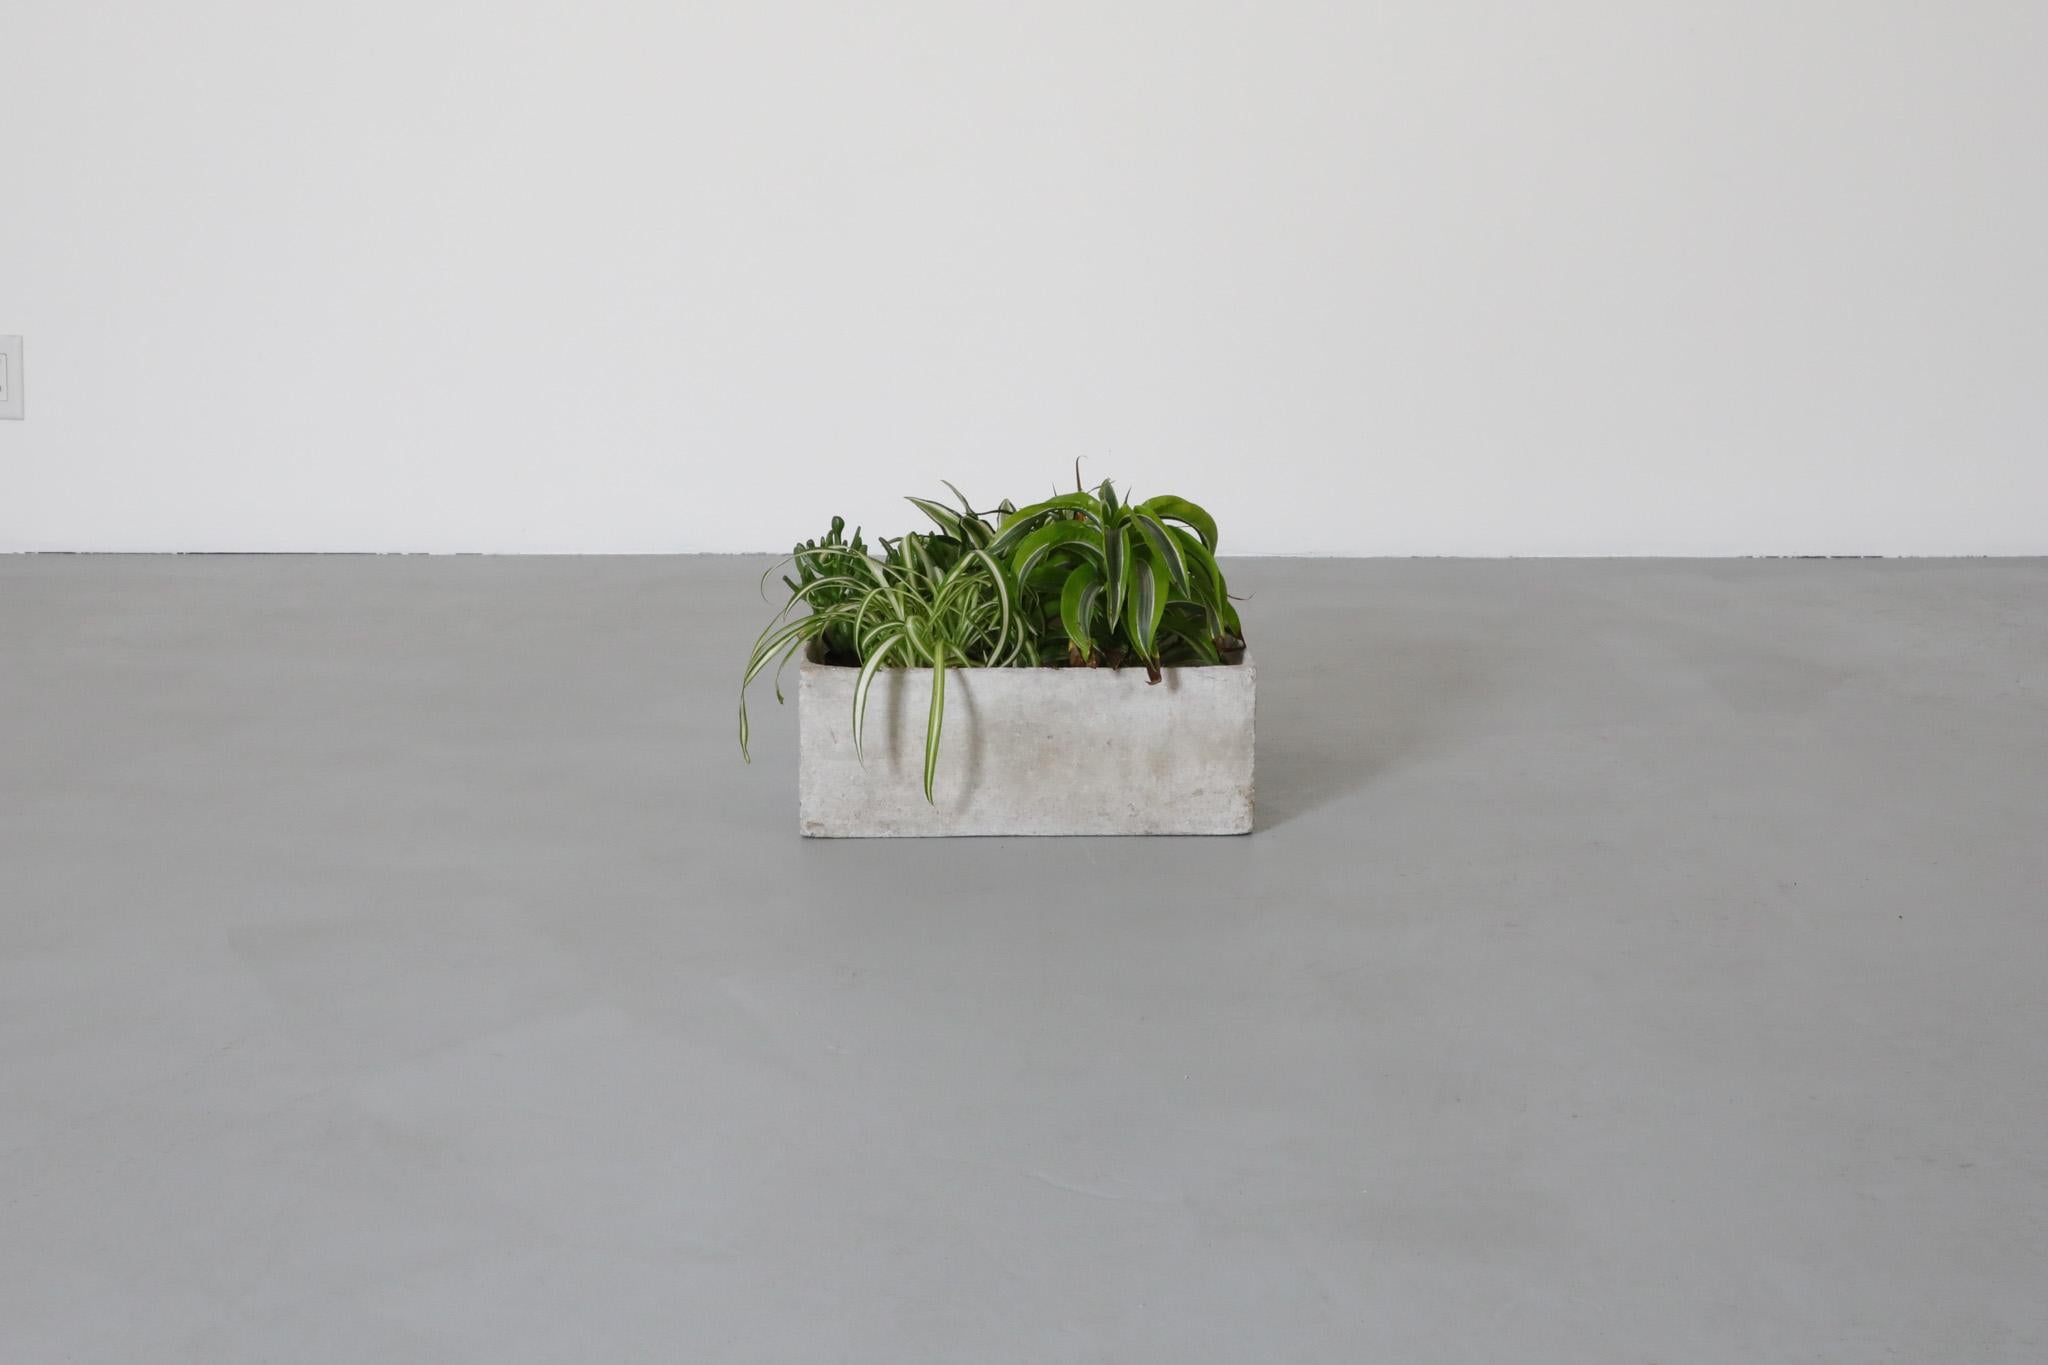 Mid-Century, Willy Guhl inspired, square concrete planter. Handsomely minimalist indoor or outdoor planter, stamped with 'JM' logo. This planter is in original condition and has some visible wear, chips and imperfections that greatly add to its raw,